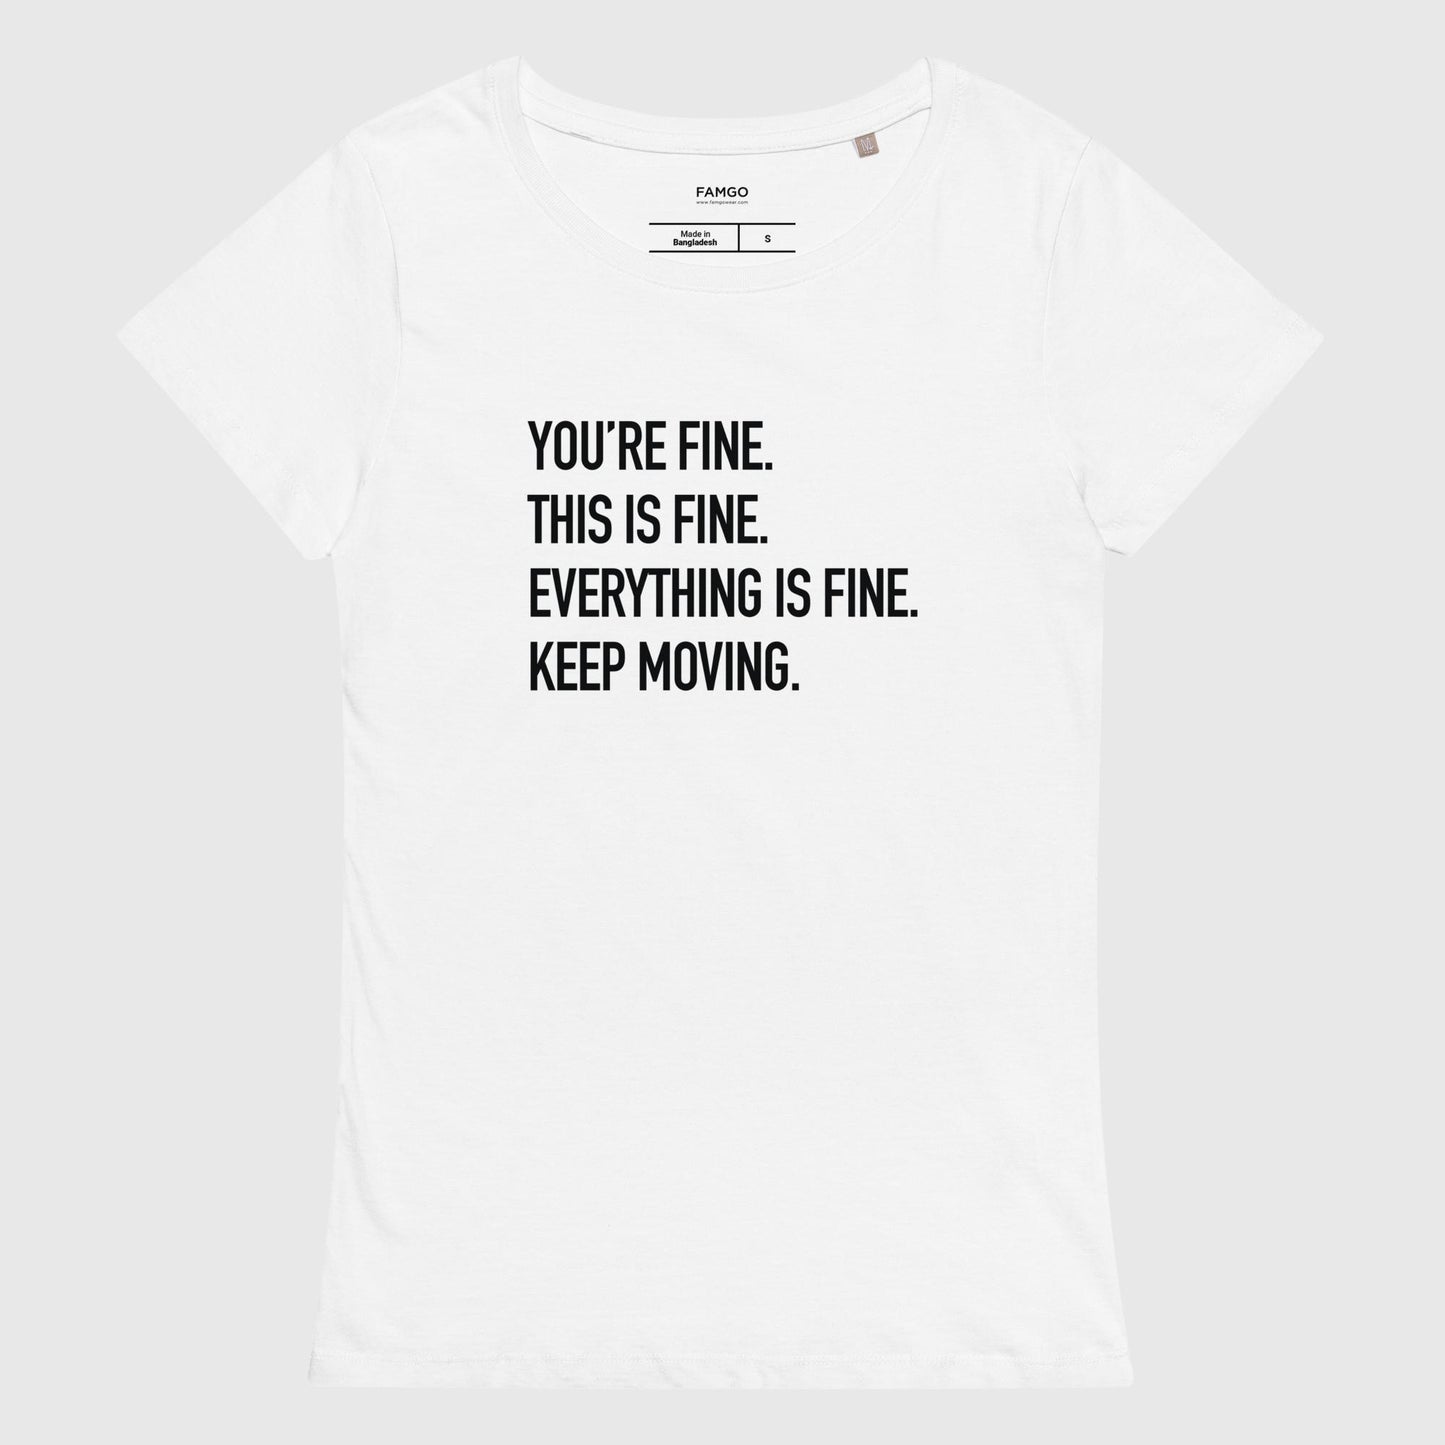 Women's white organic cotton t-shirt that features Courtney Dauwalter's mantra, "You're fine. This is fine. Everything is fine. Keep moving."